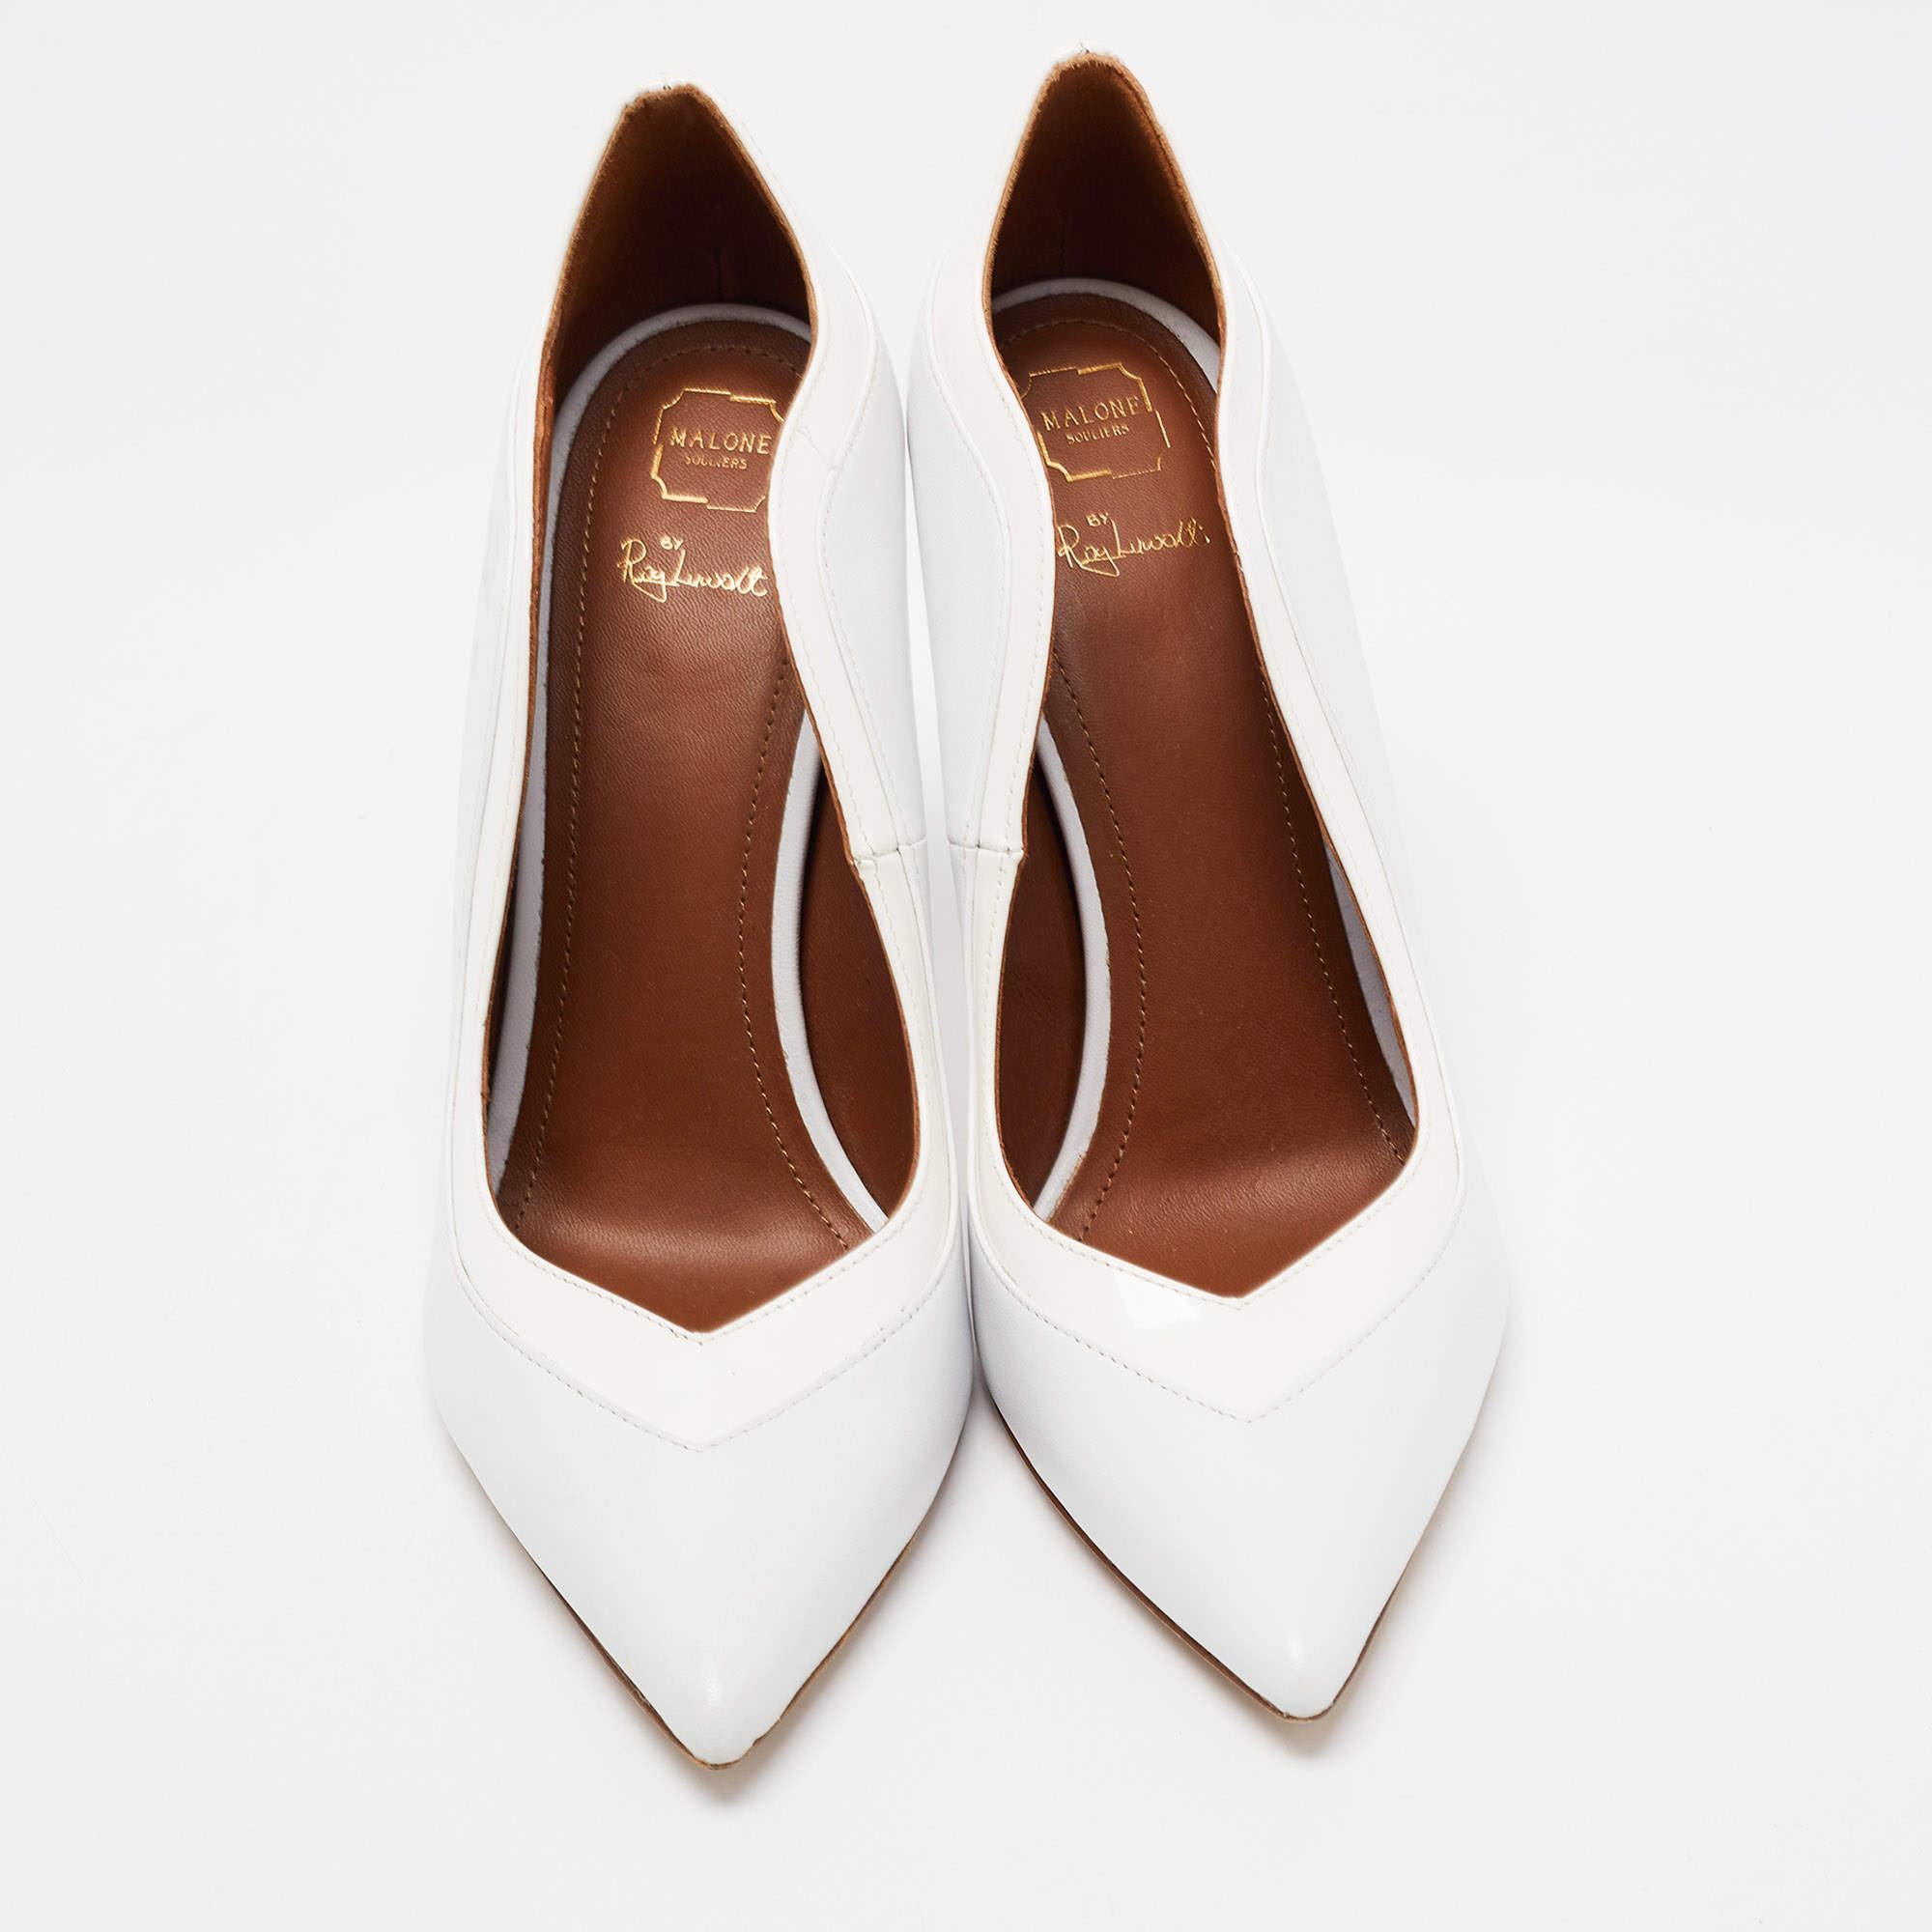 Malone Souliers White Leather and Patent Penelope Pointed Toe Pumps Size 39.5 For Sale 1